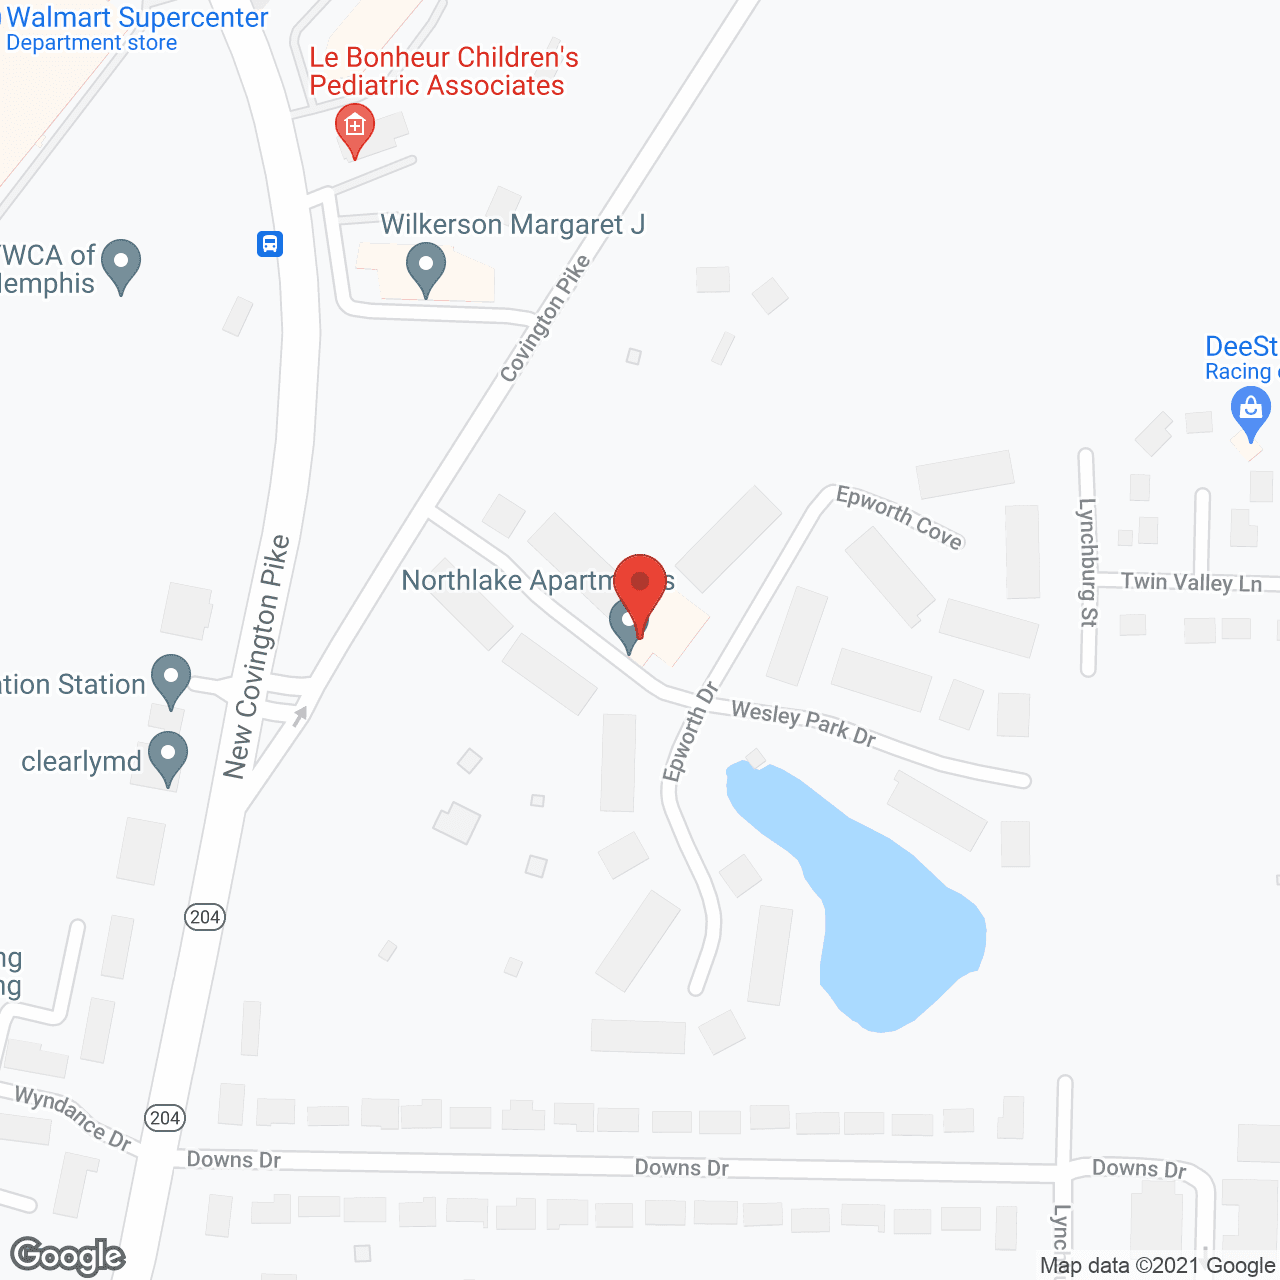 Northlake Apartments in google map